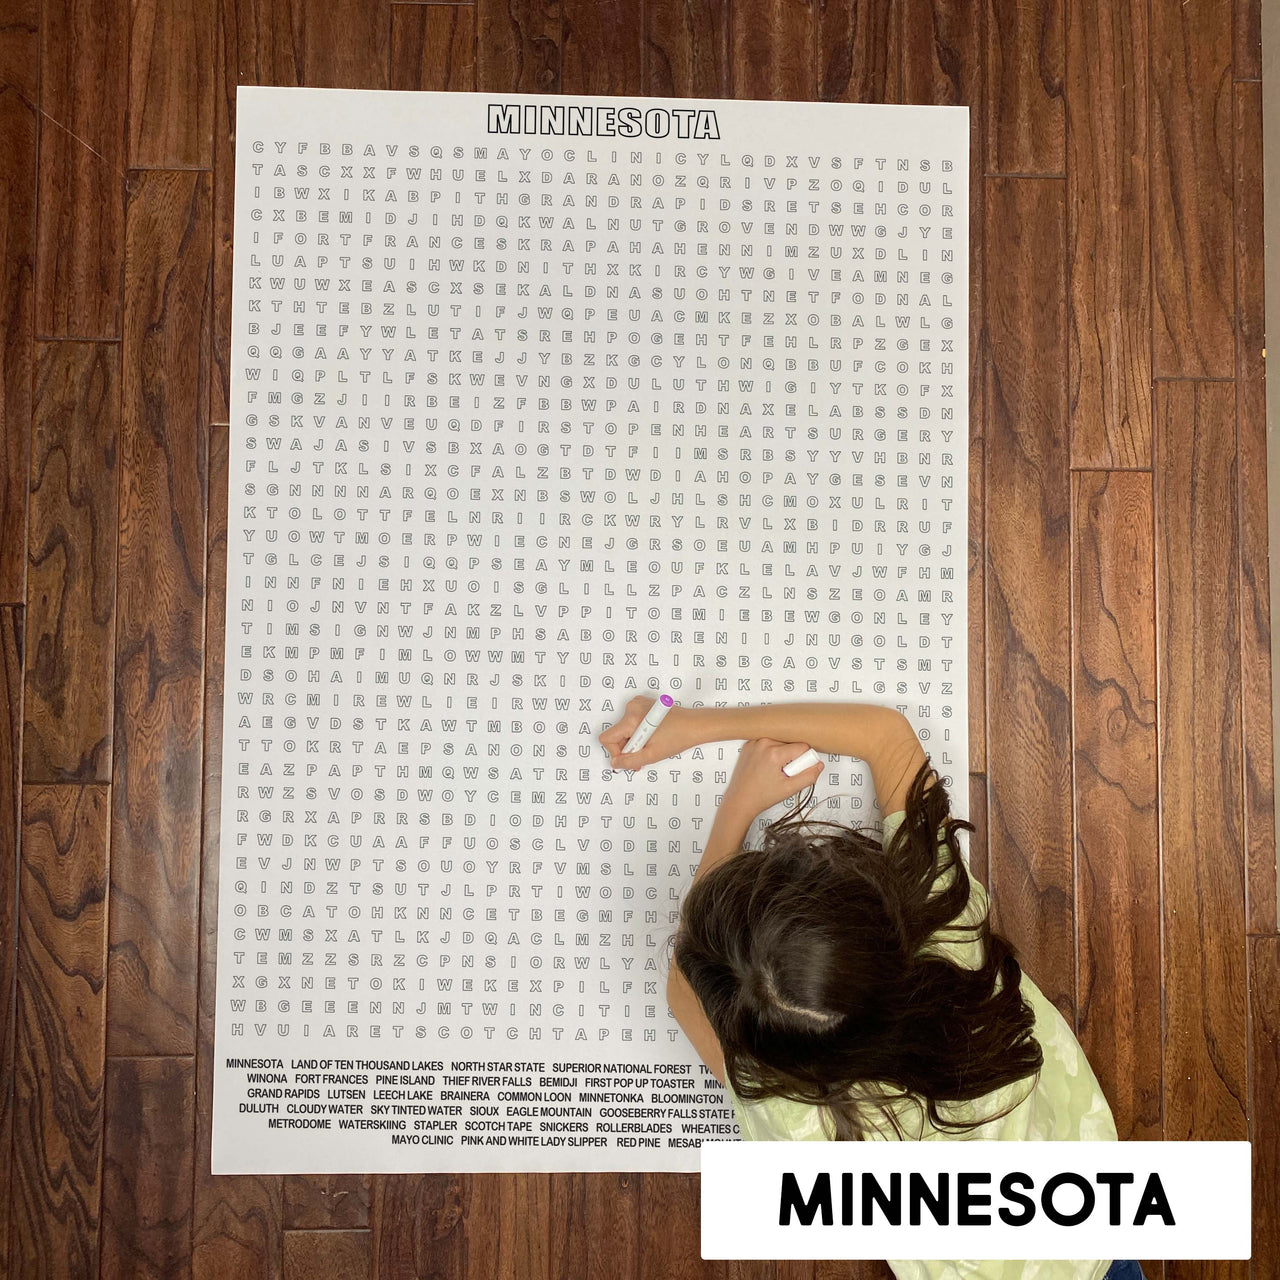 Minnesota State BUNDLE Coloring and Word Search